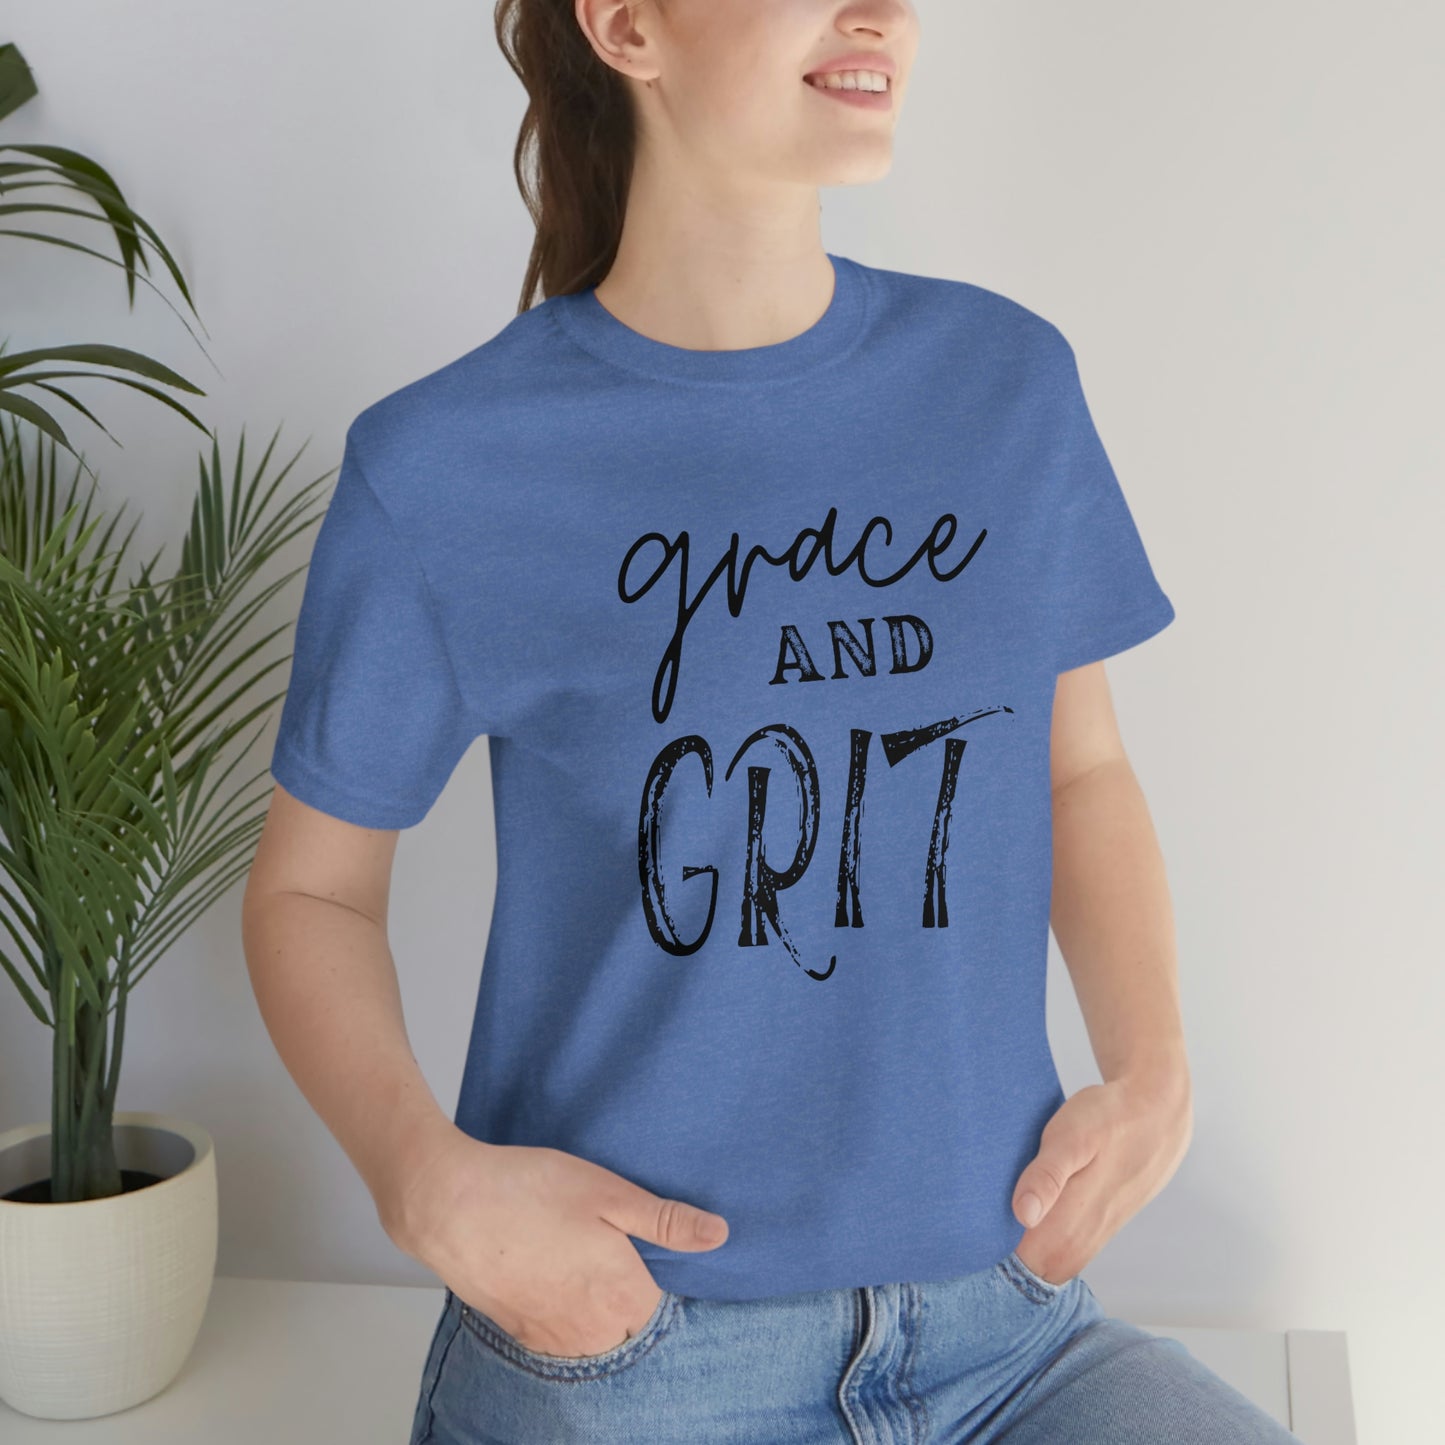 "Grace and Grit" Unisex Jersey Short Tee